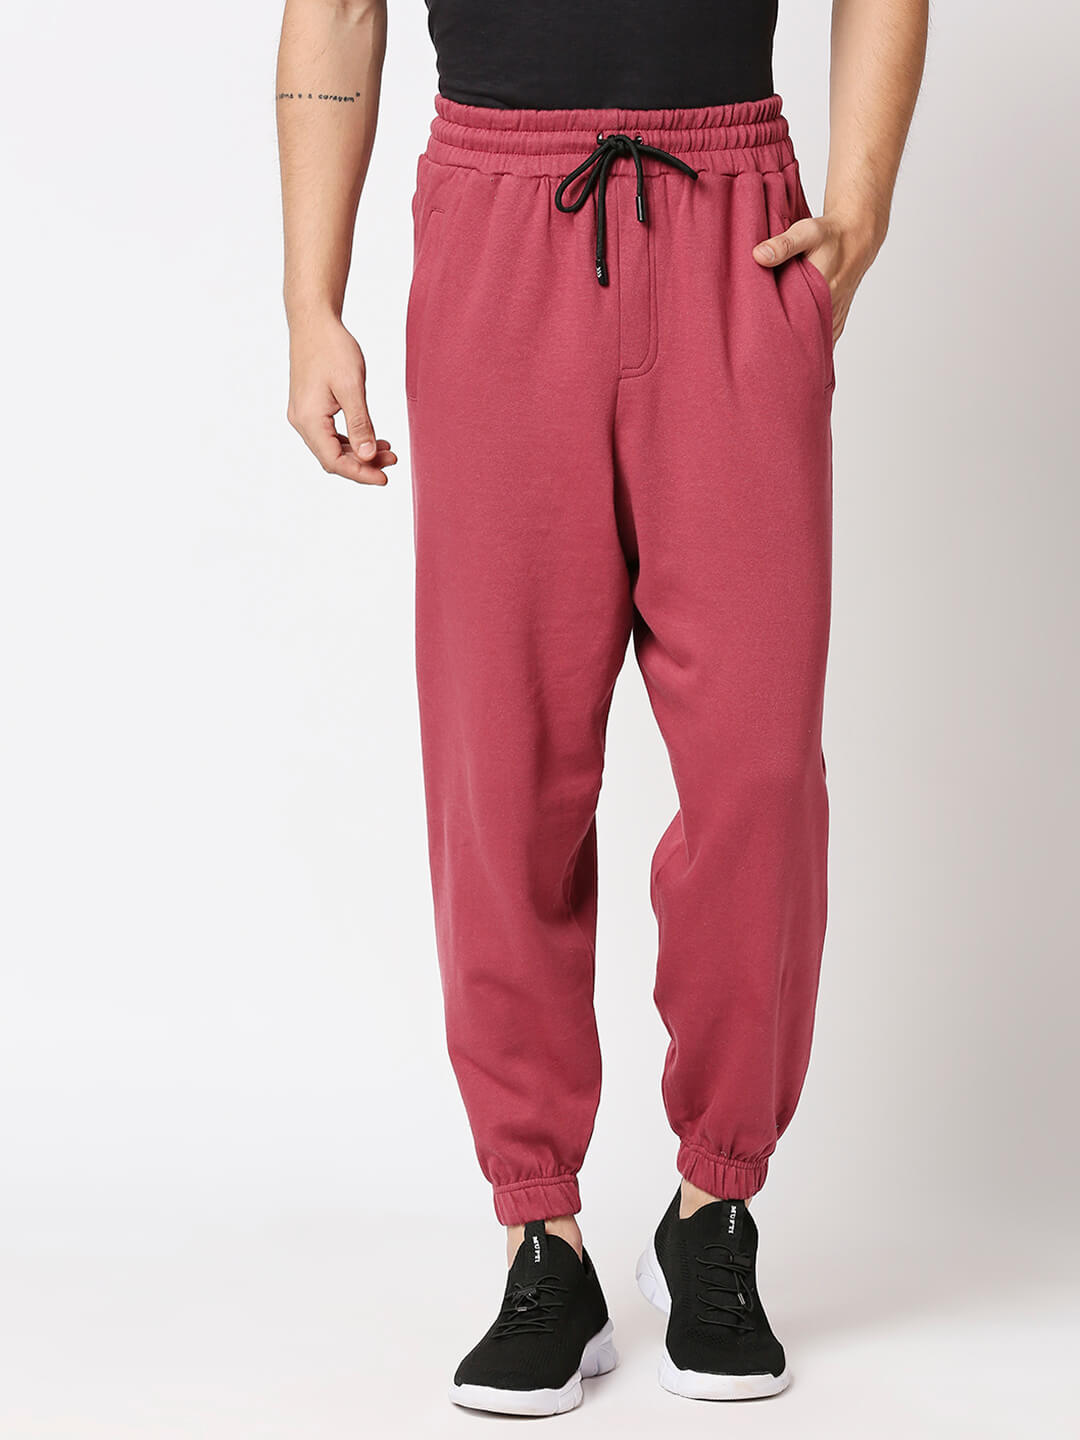 Relaxed Fit Casual Joggers - Dark Pink